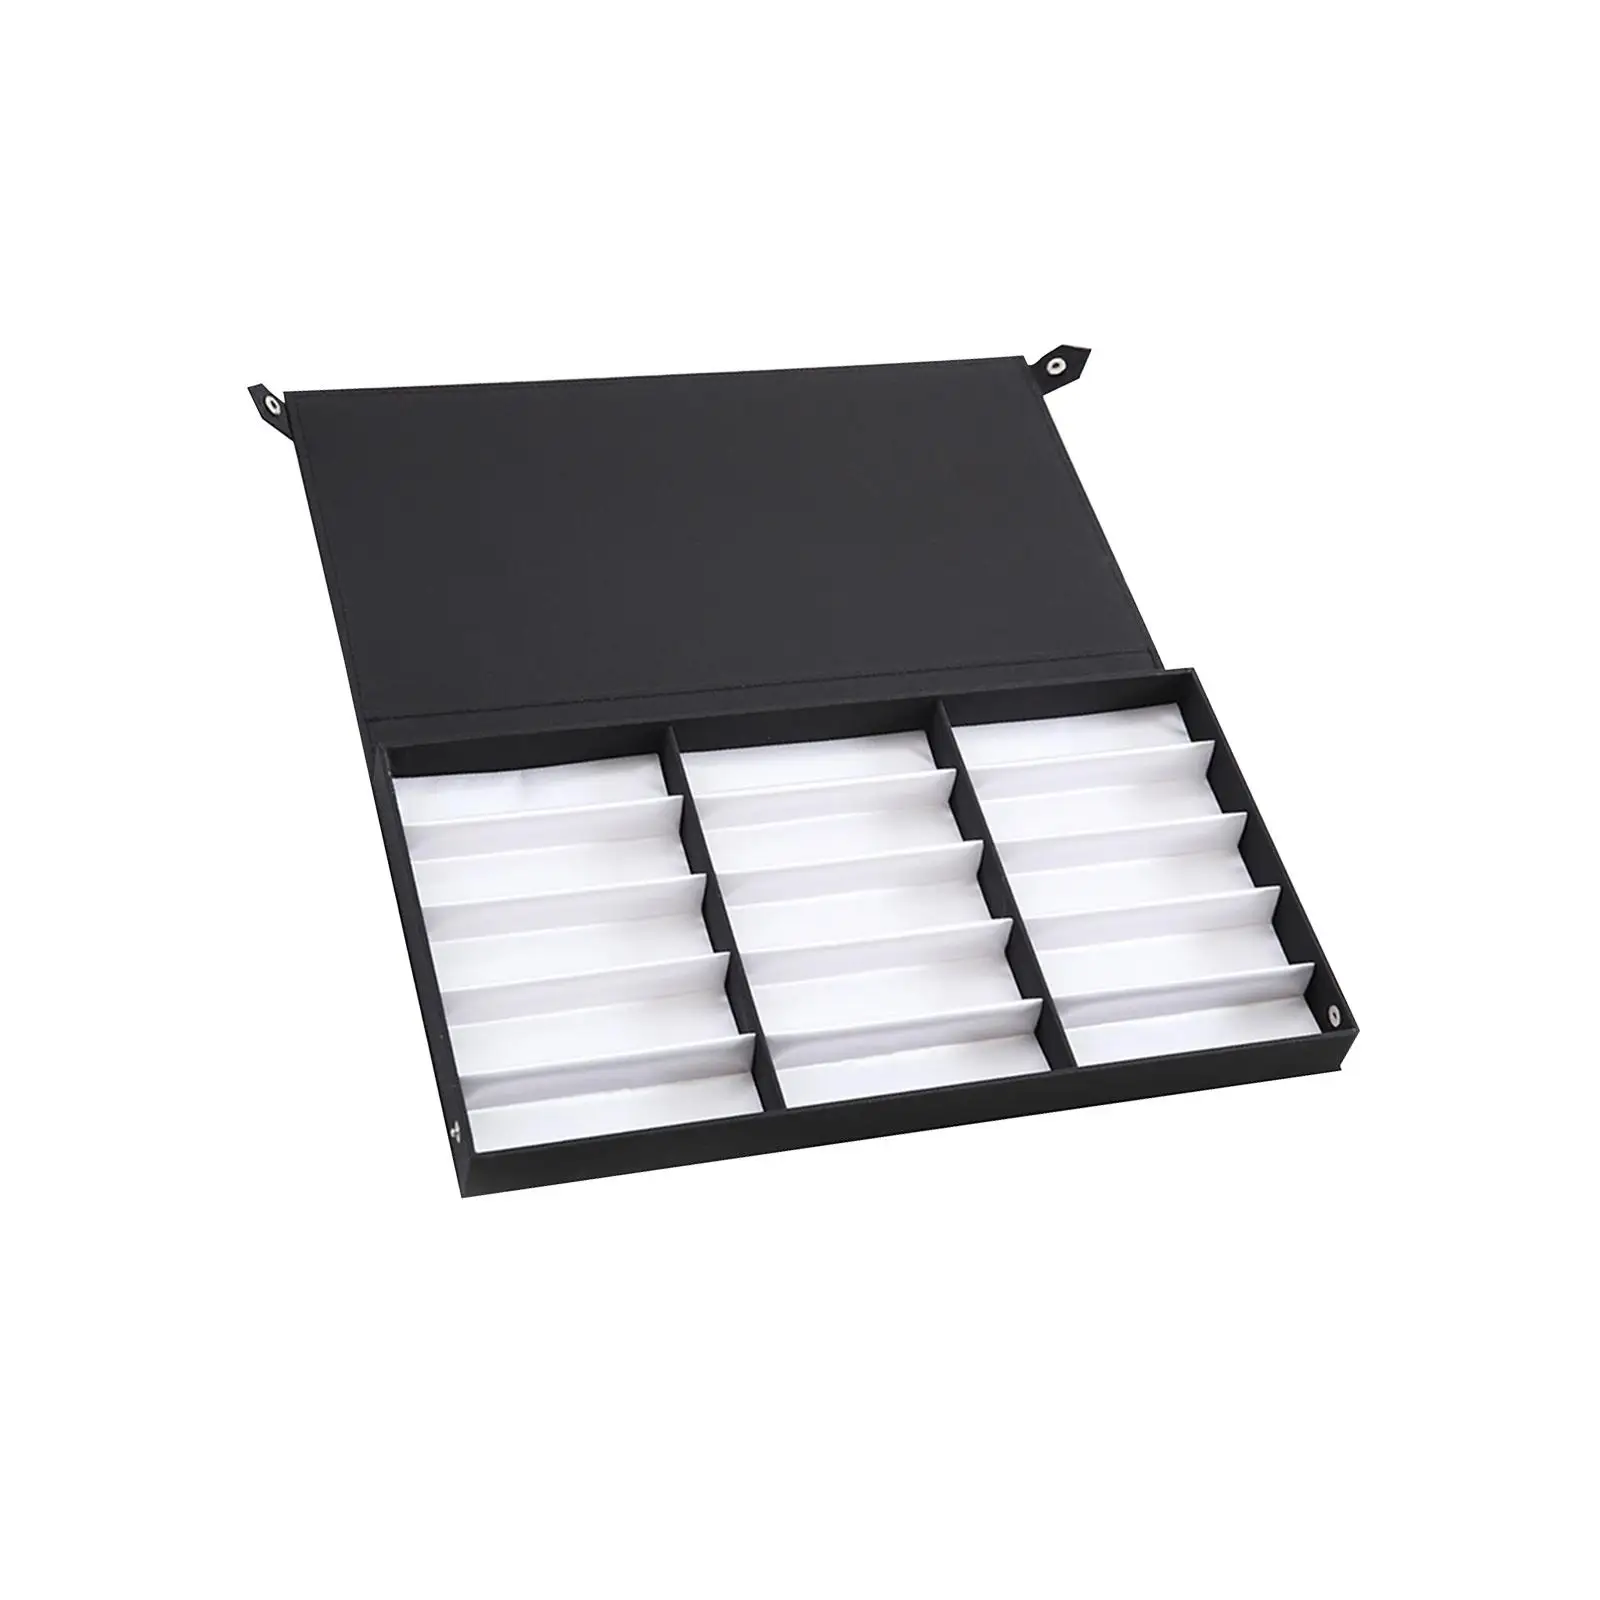 Glasses Display Box Glasses Showcase Glasses Storage Case Sunglasses Display Stand 15 Grids for Travel Table Drawer Home Closet